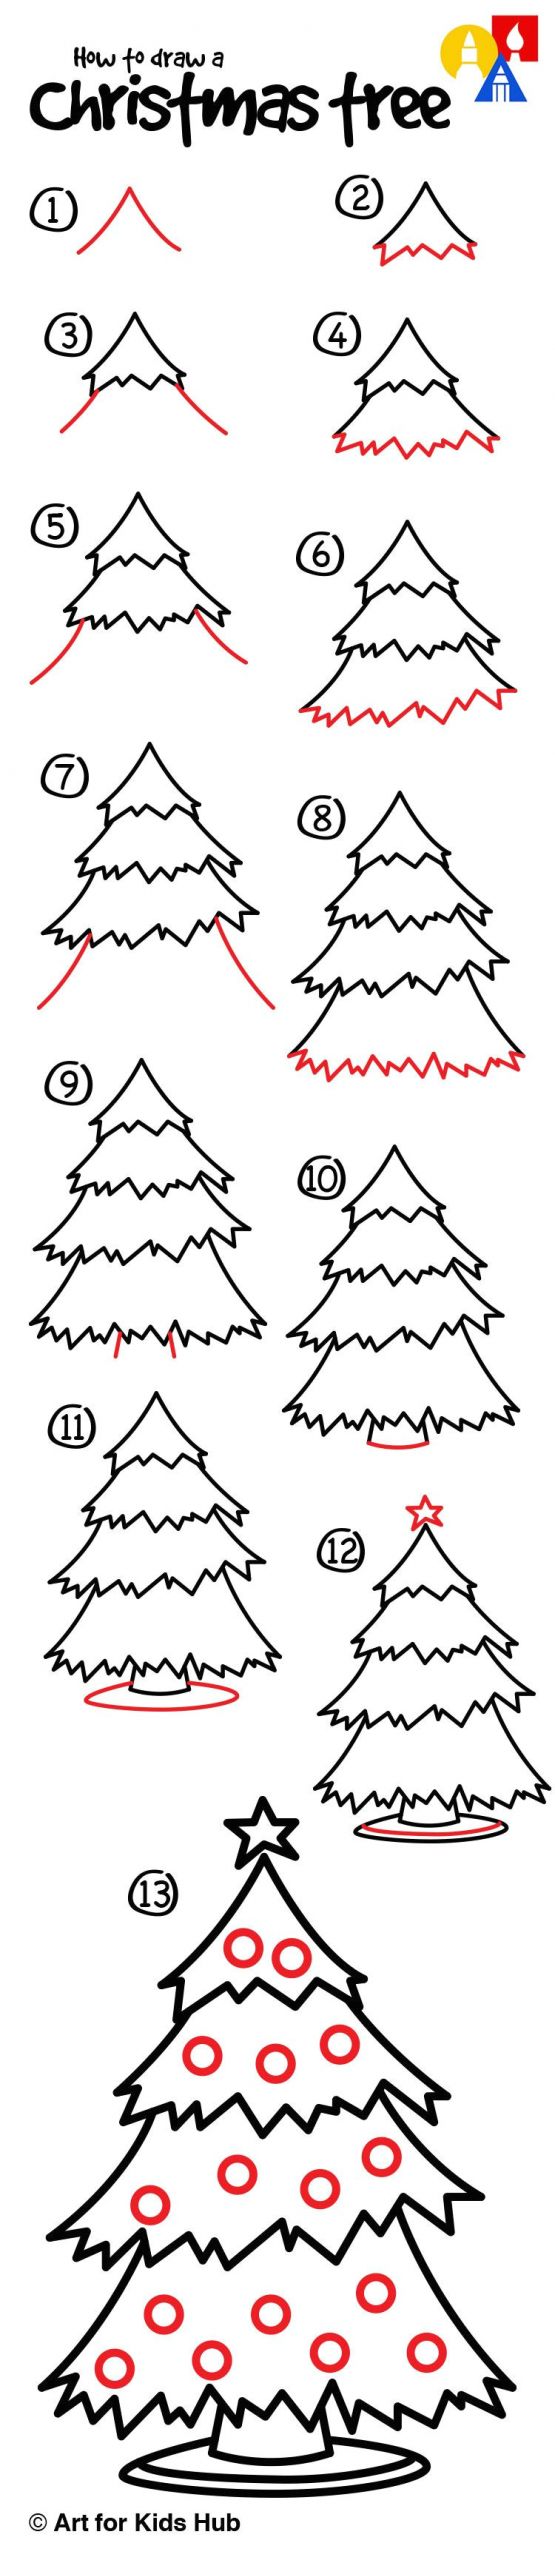 Cute Easy Christmas Drawings Step by Step How to Draw A Christmas Tree Art for Kids Hub Art for